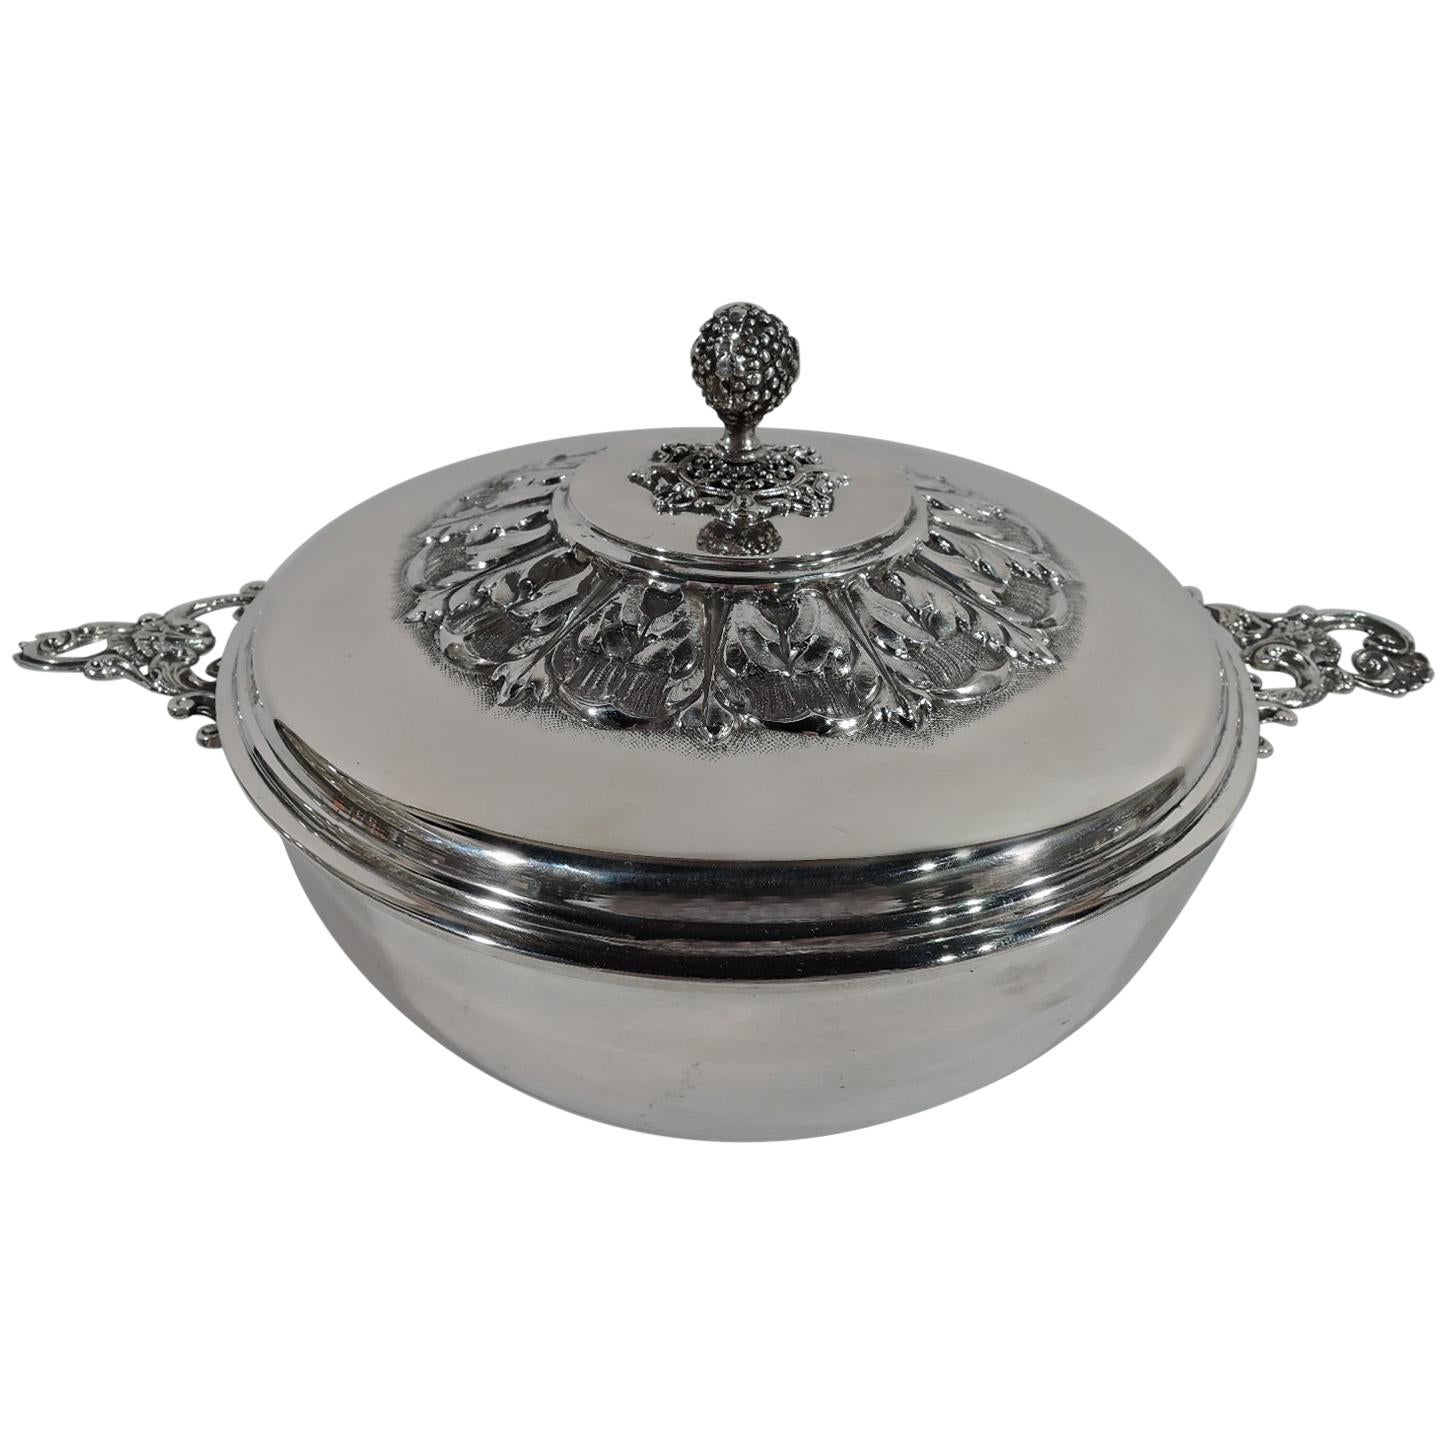 Italian Silver Covered Vegetable Serving Dish